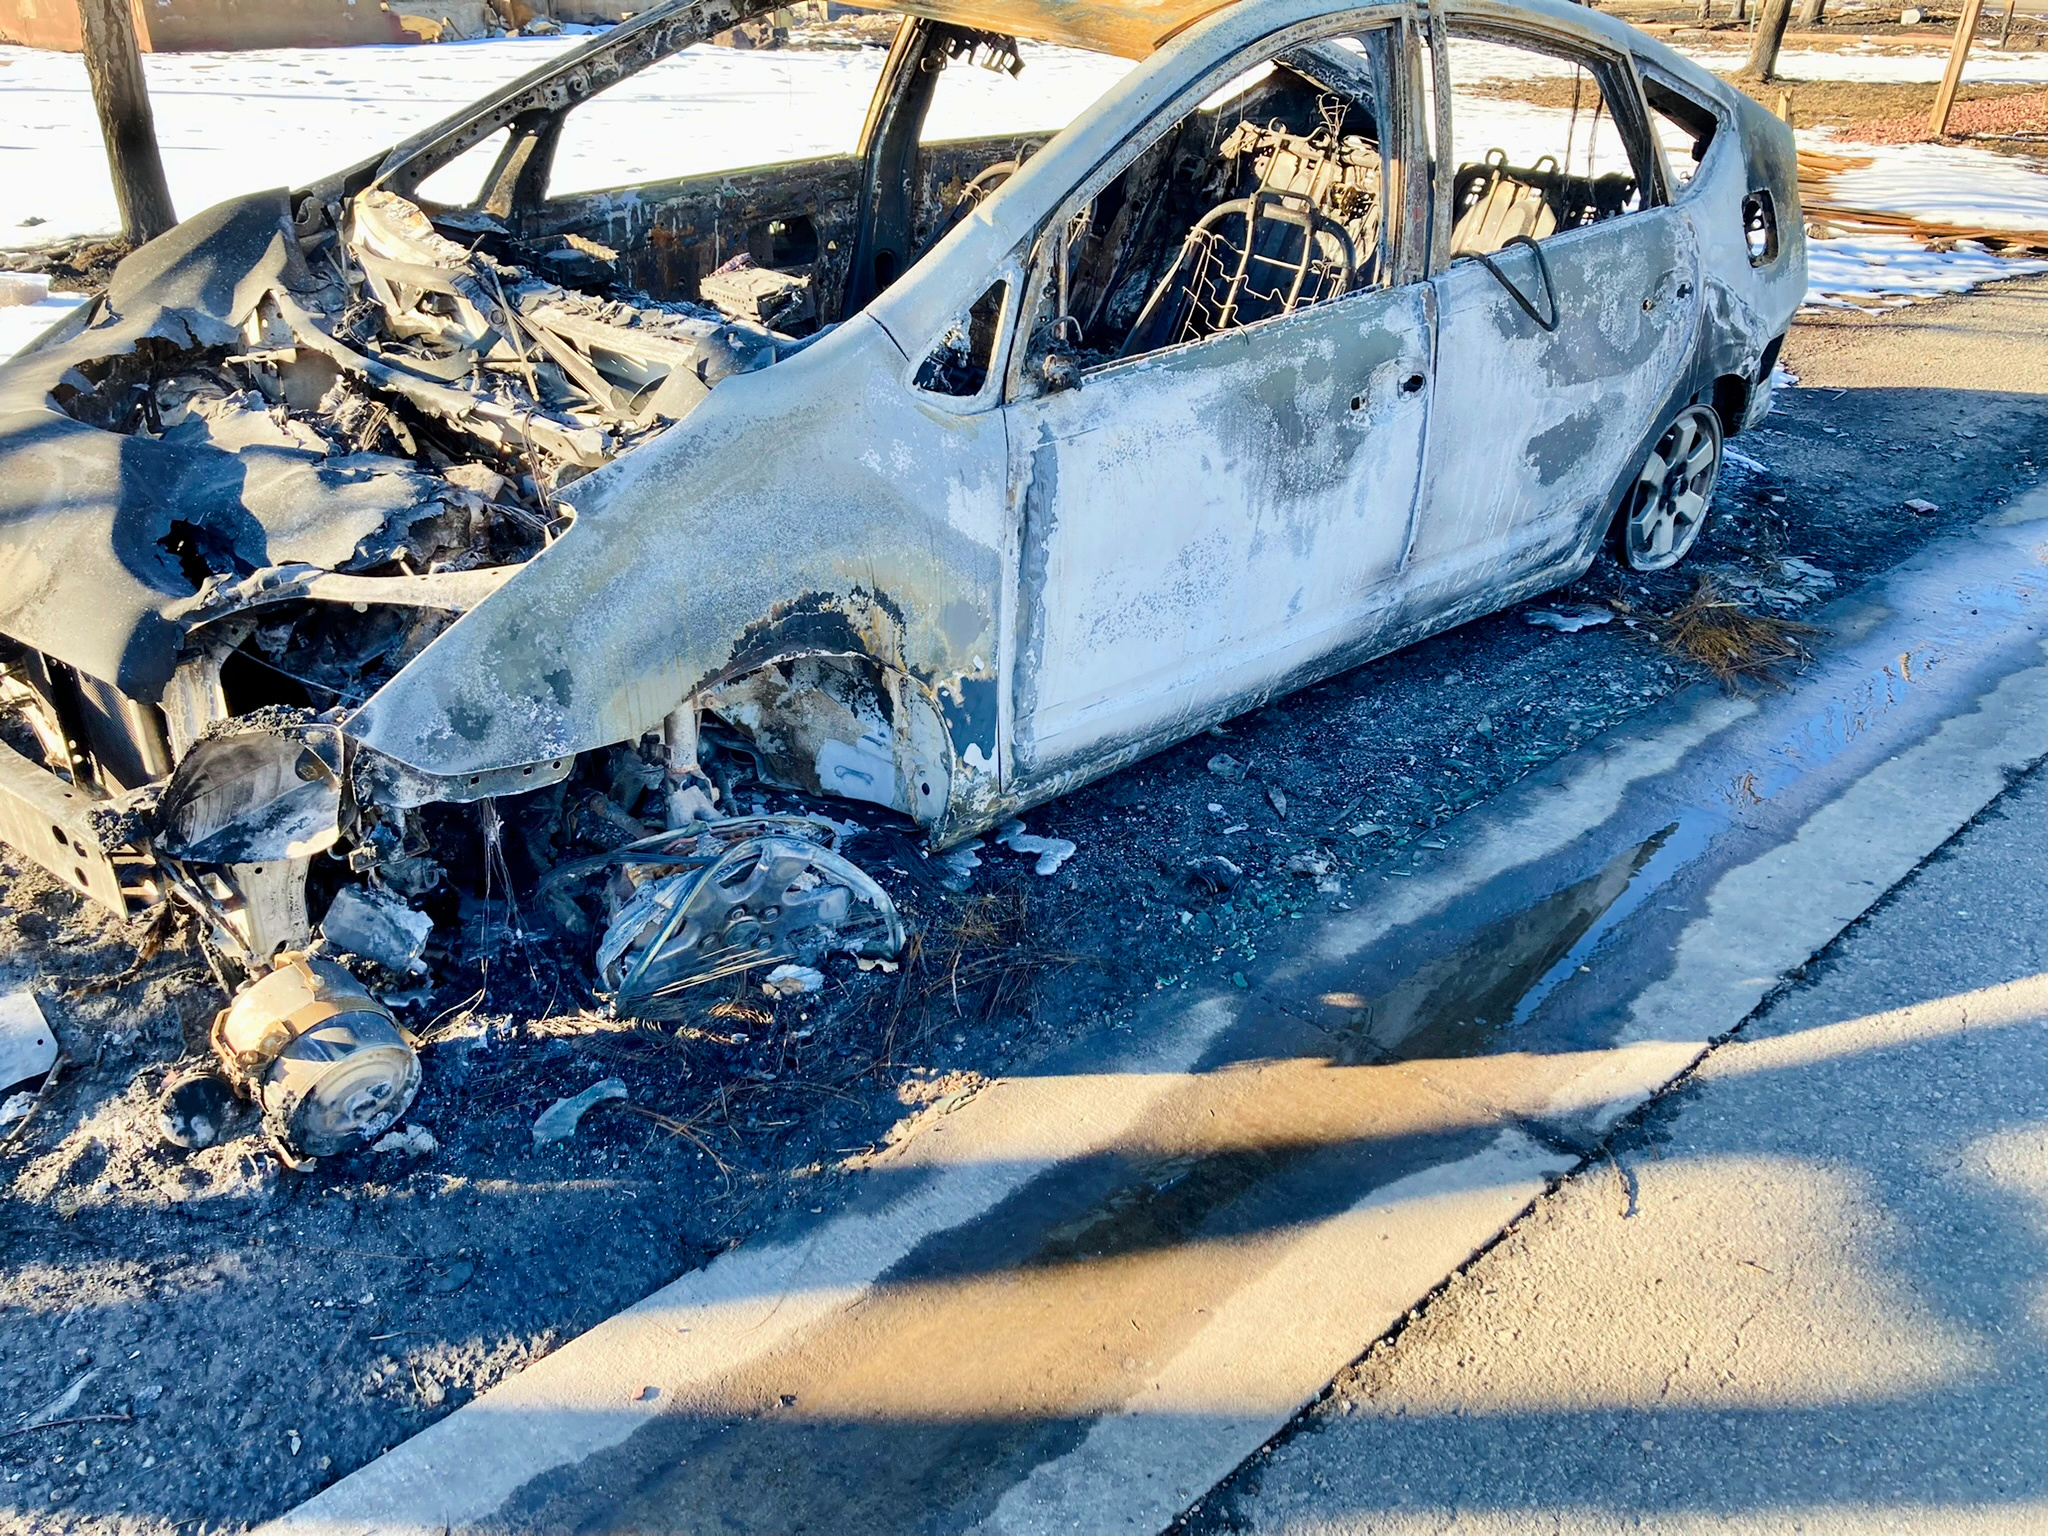 A burned vehicle in Superior, Colorado, on January 9, 2022